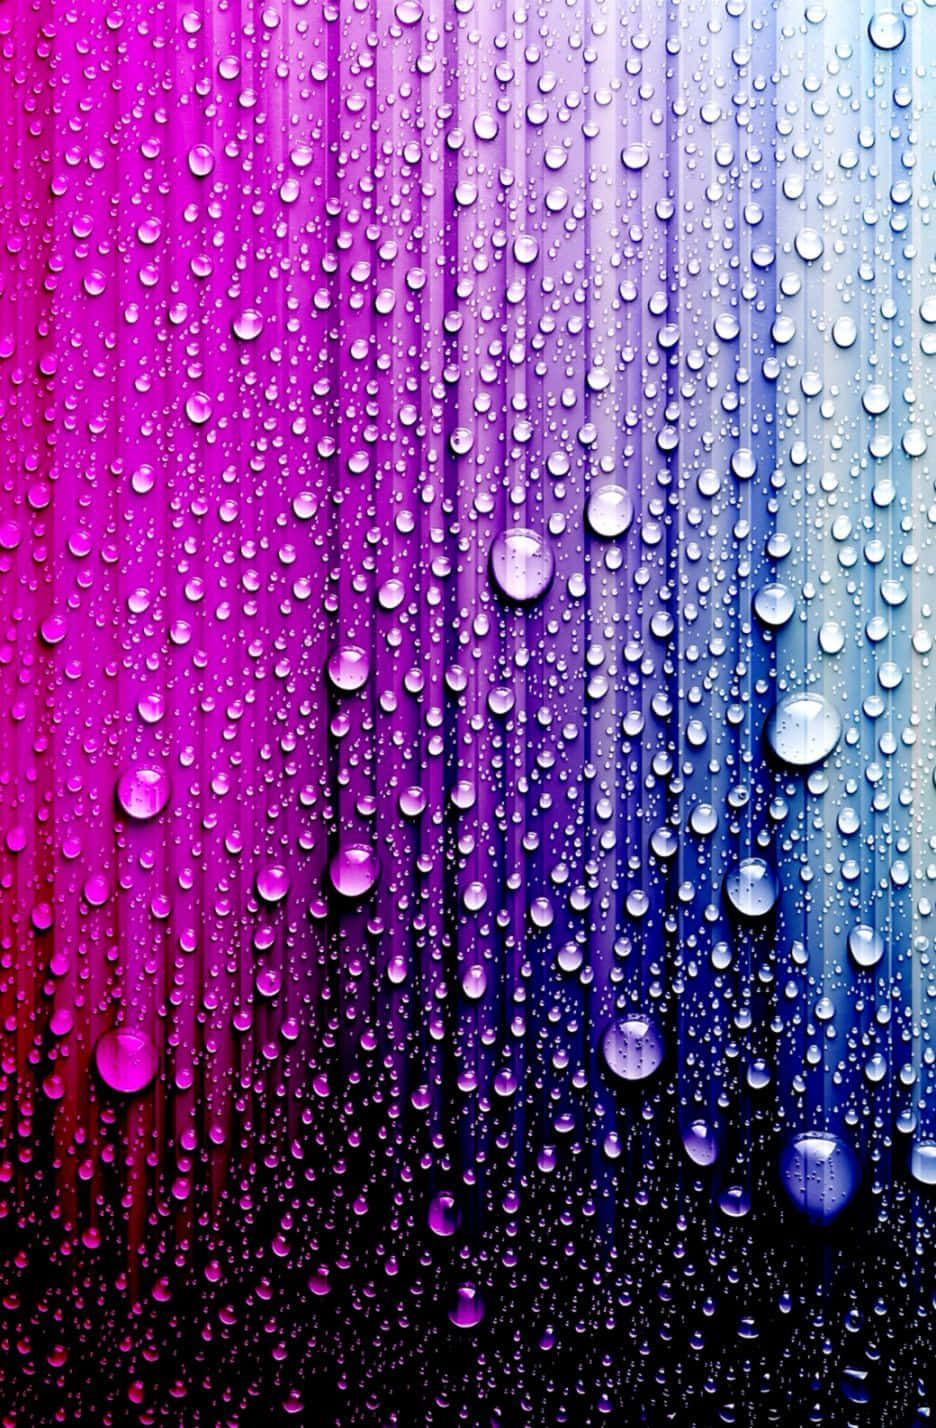 Water Droplets On A Purple And Blue Background Wallpaper